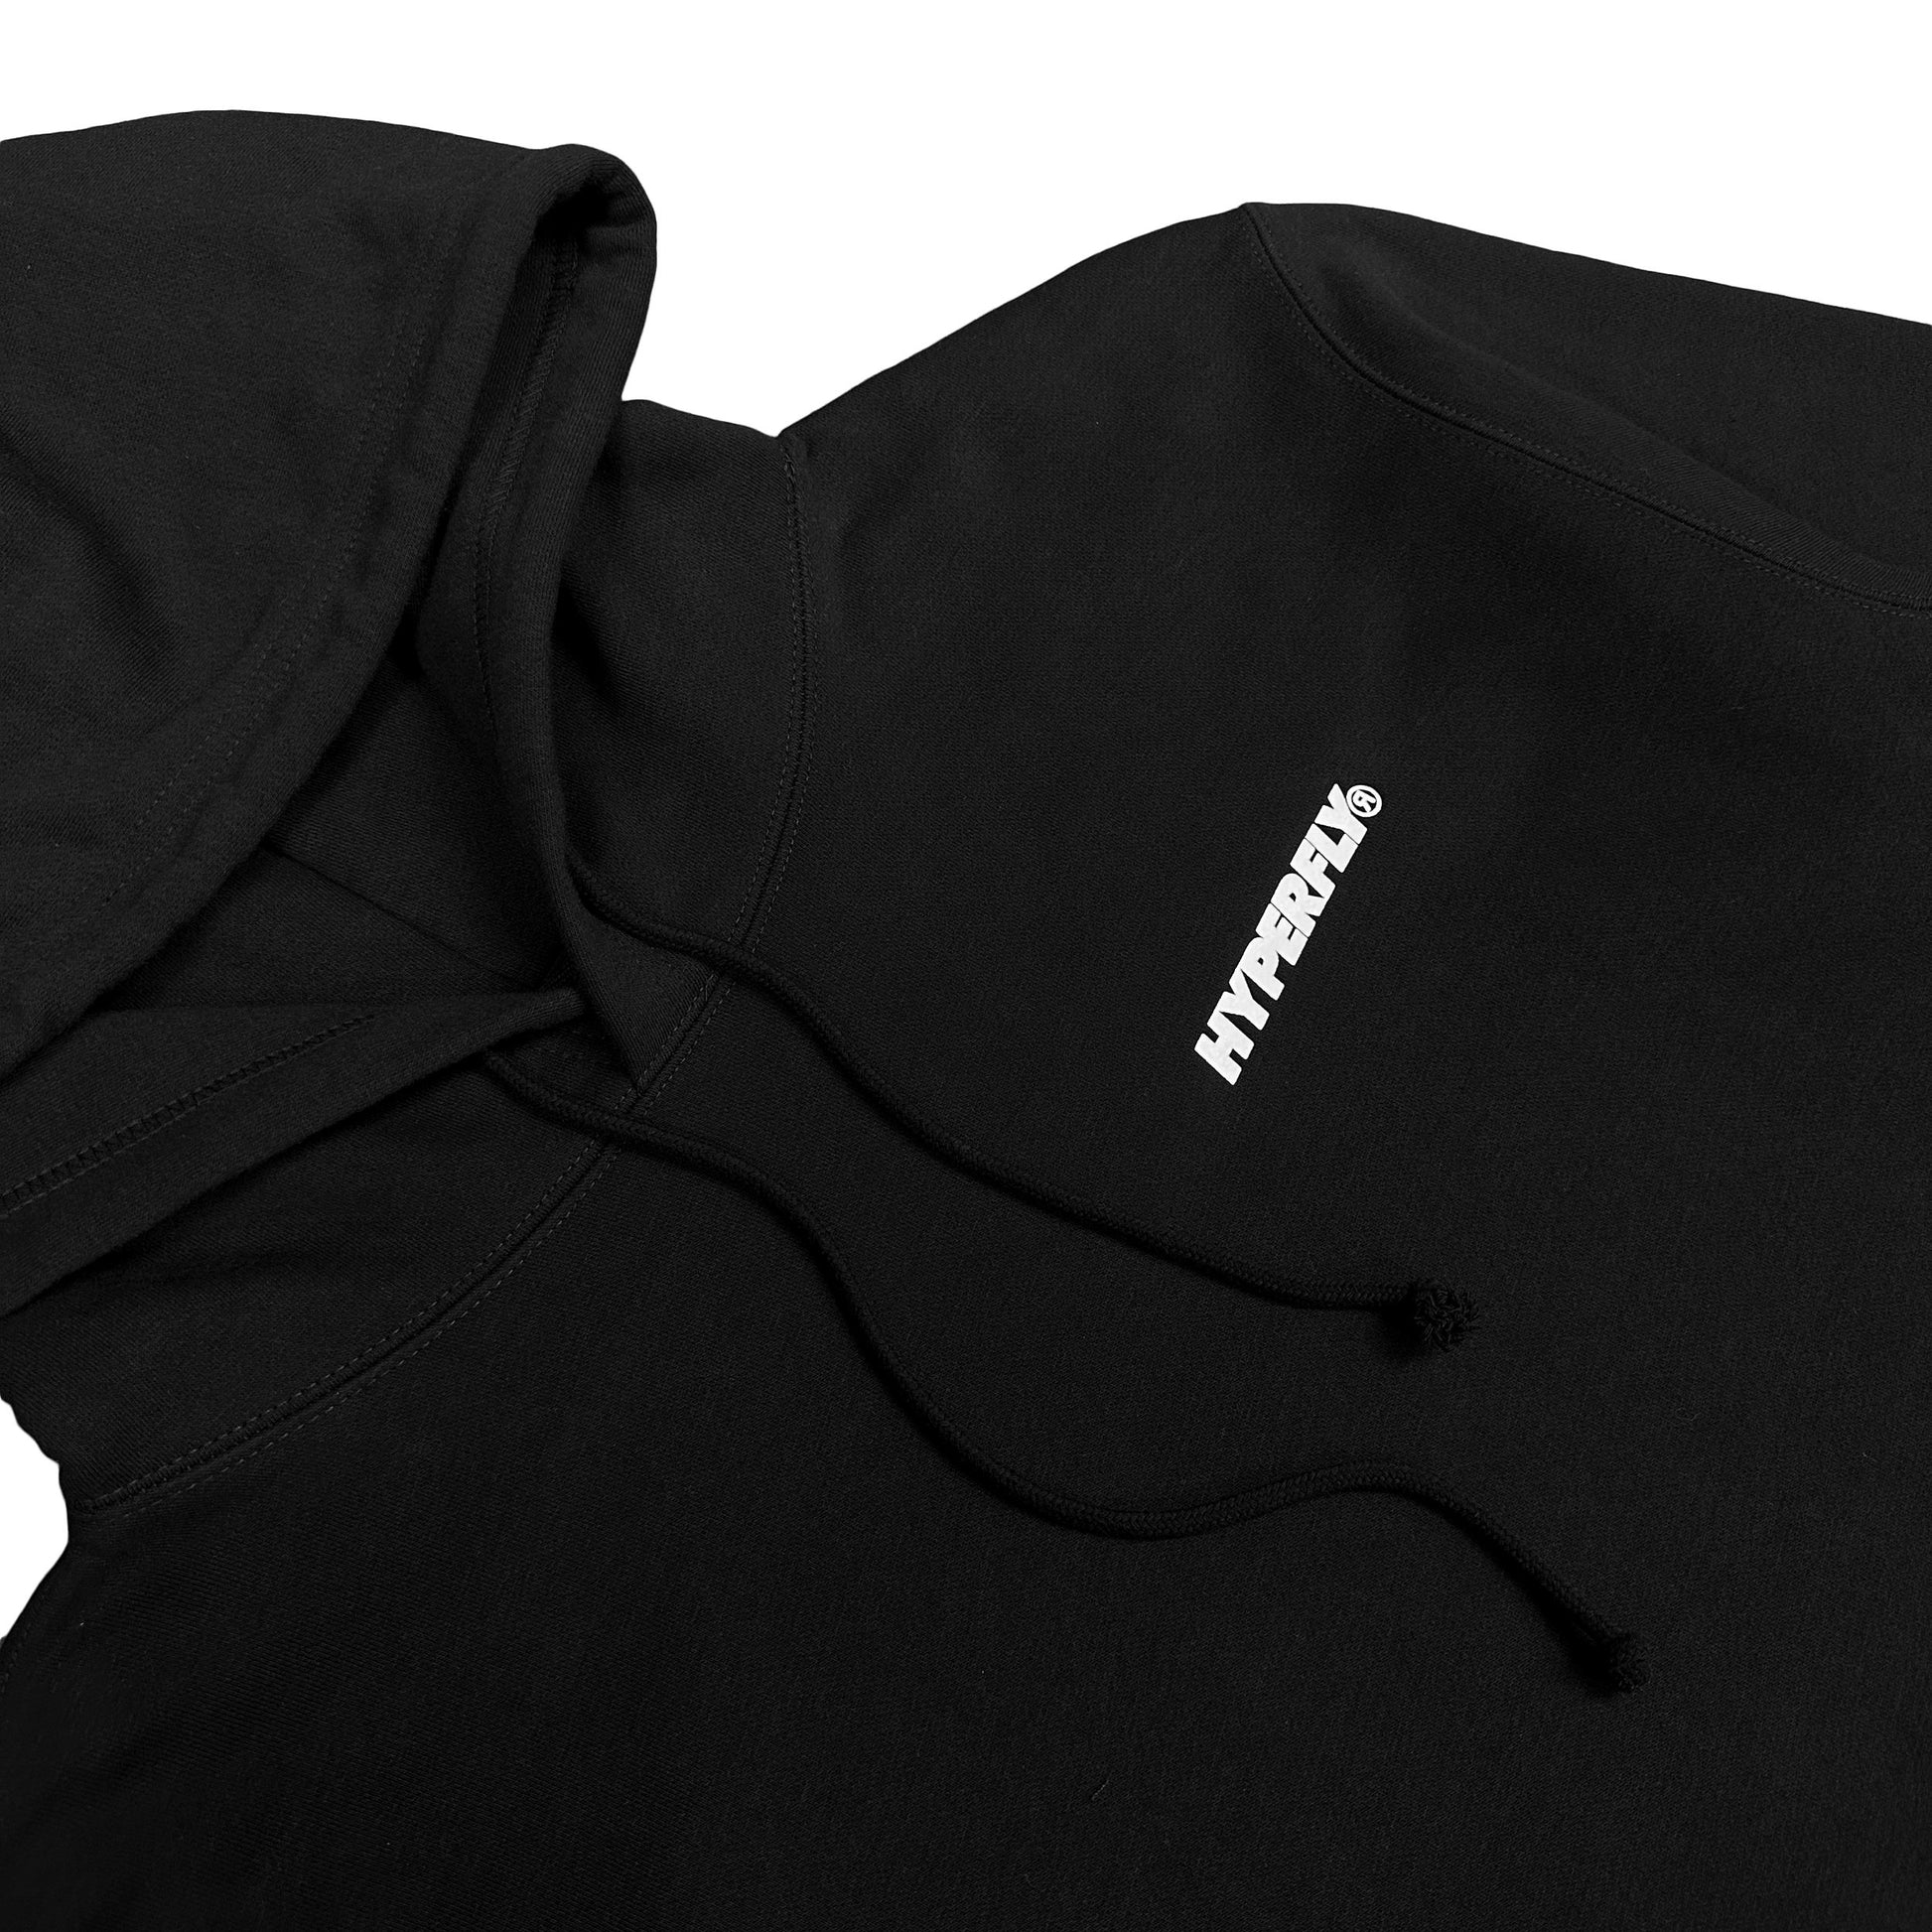 YCTH. Staple Hoodie Apparel - Outerwear Hyperfly 